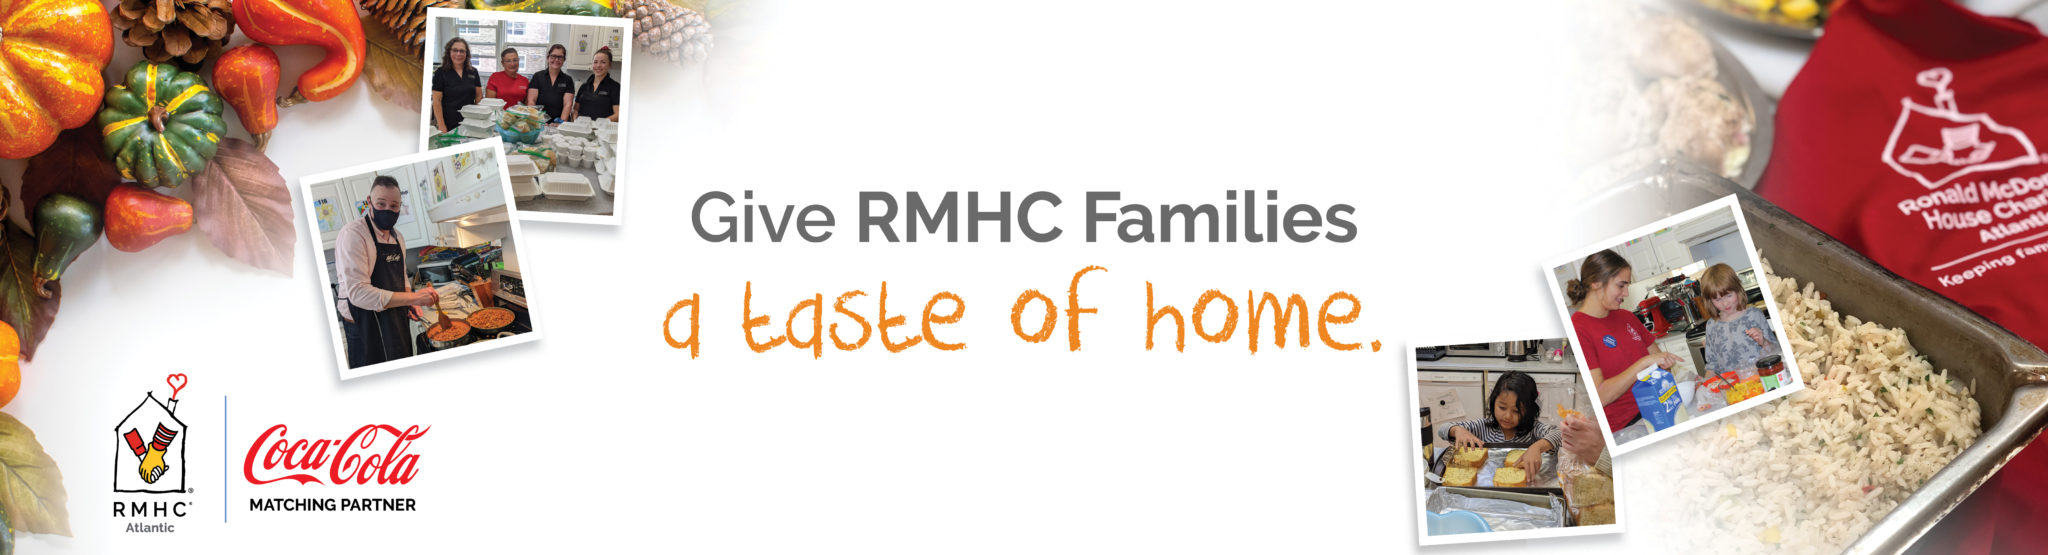 Banner - Give RMHC families a taste of home